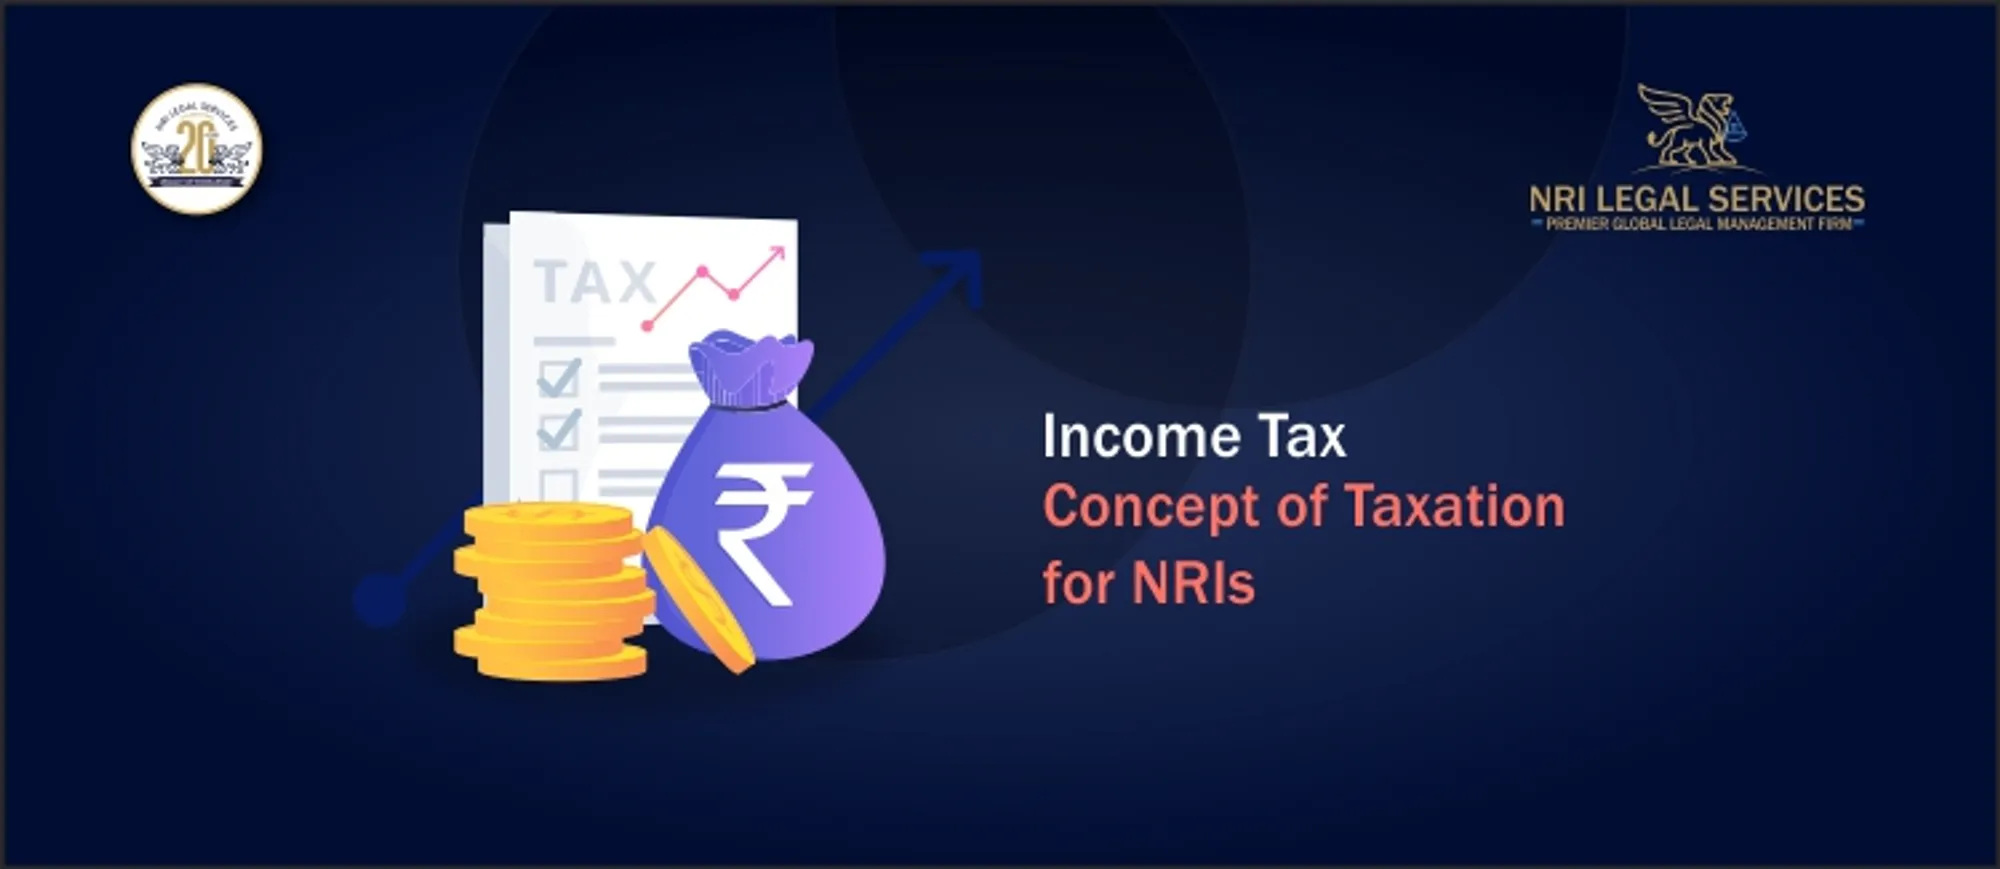 Income Tax: Concept of Taxation for NRIs